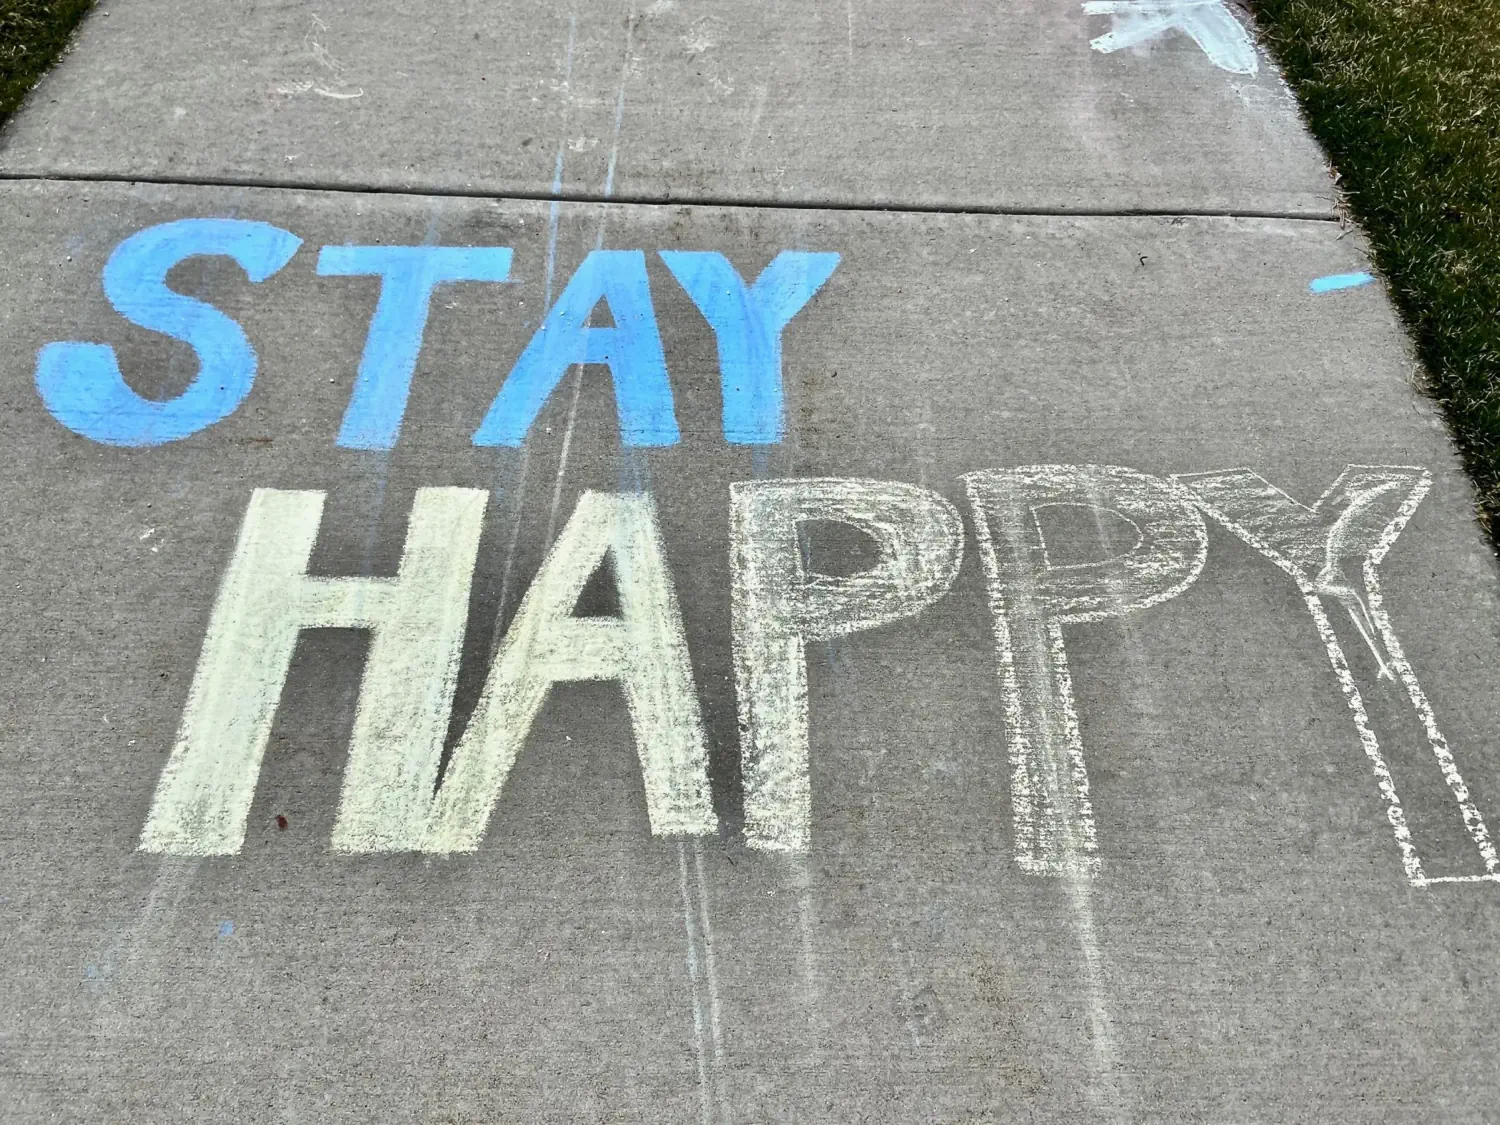 We are trying to do just that, stay happy!